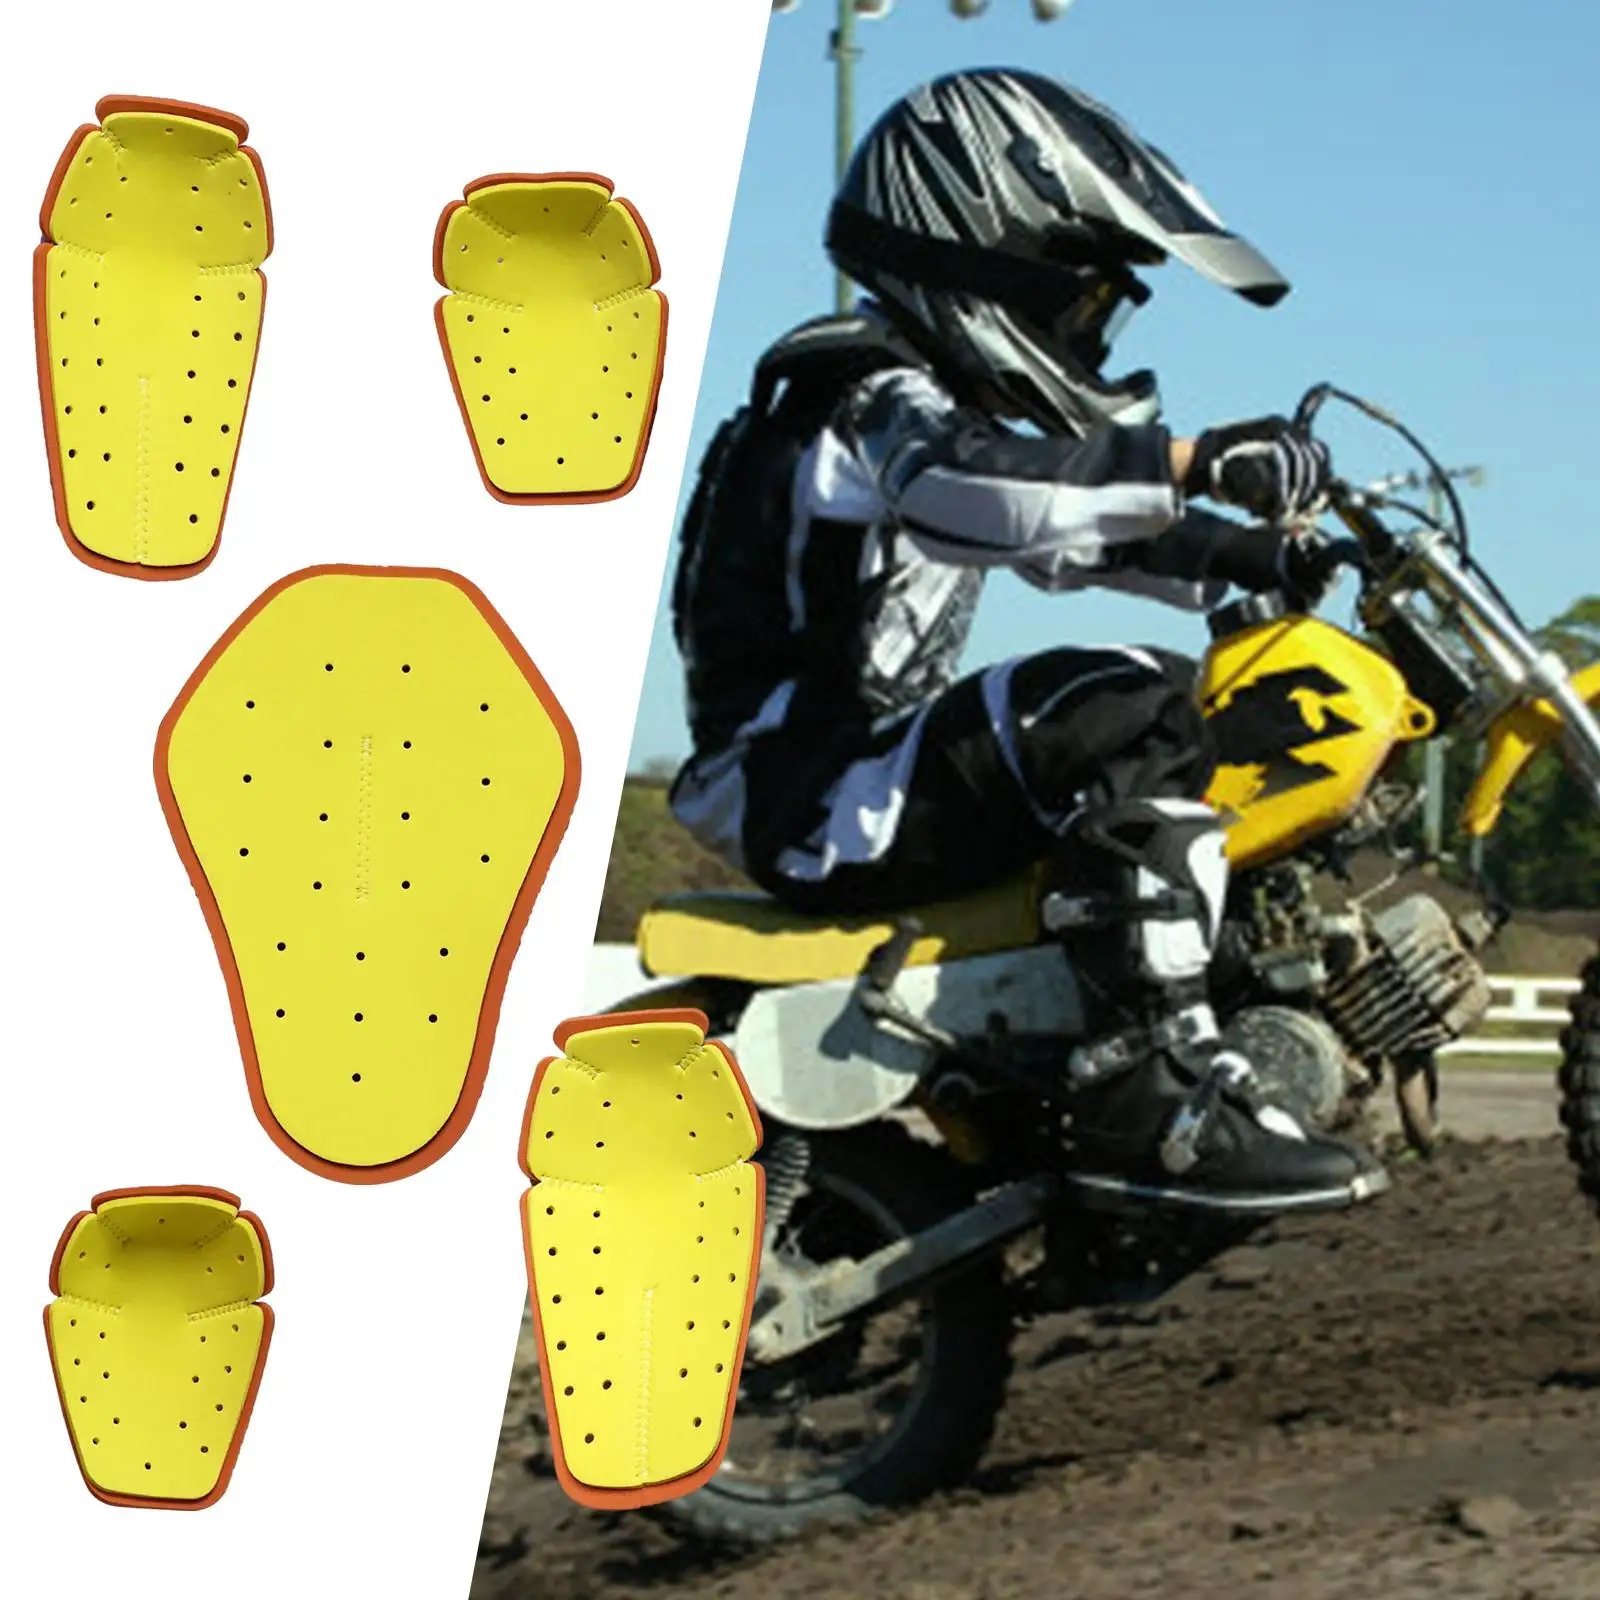 Motorbike Body Protective Gear Insert Protector Set Motorcycle Accessories for Biker